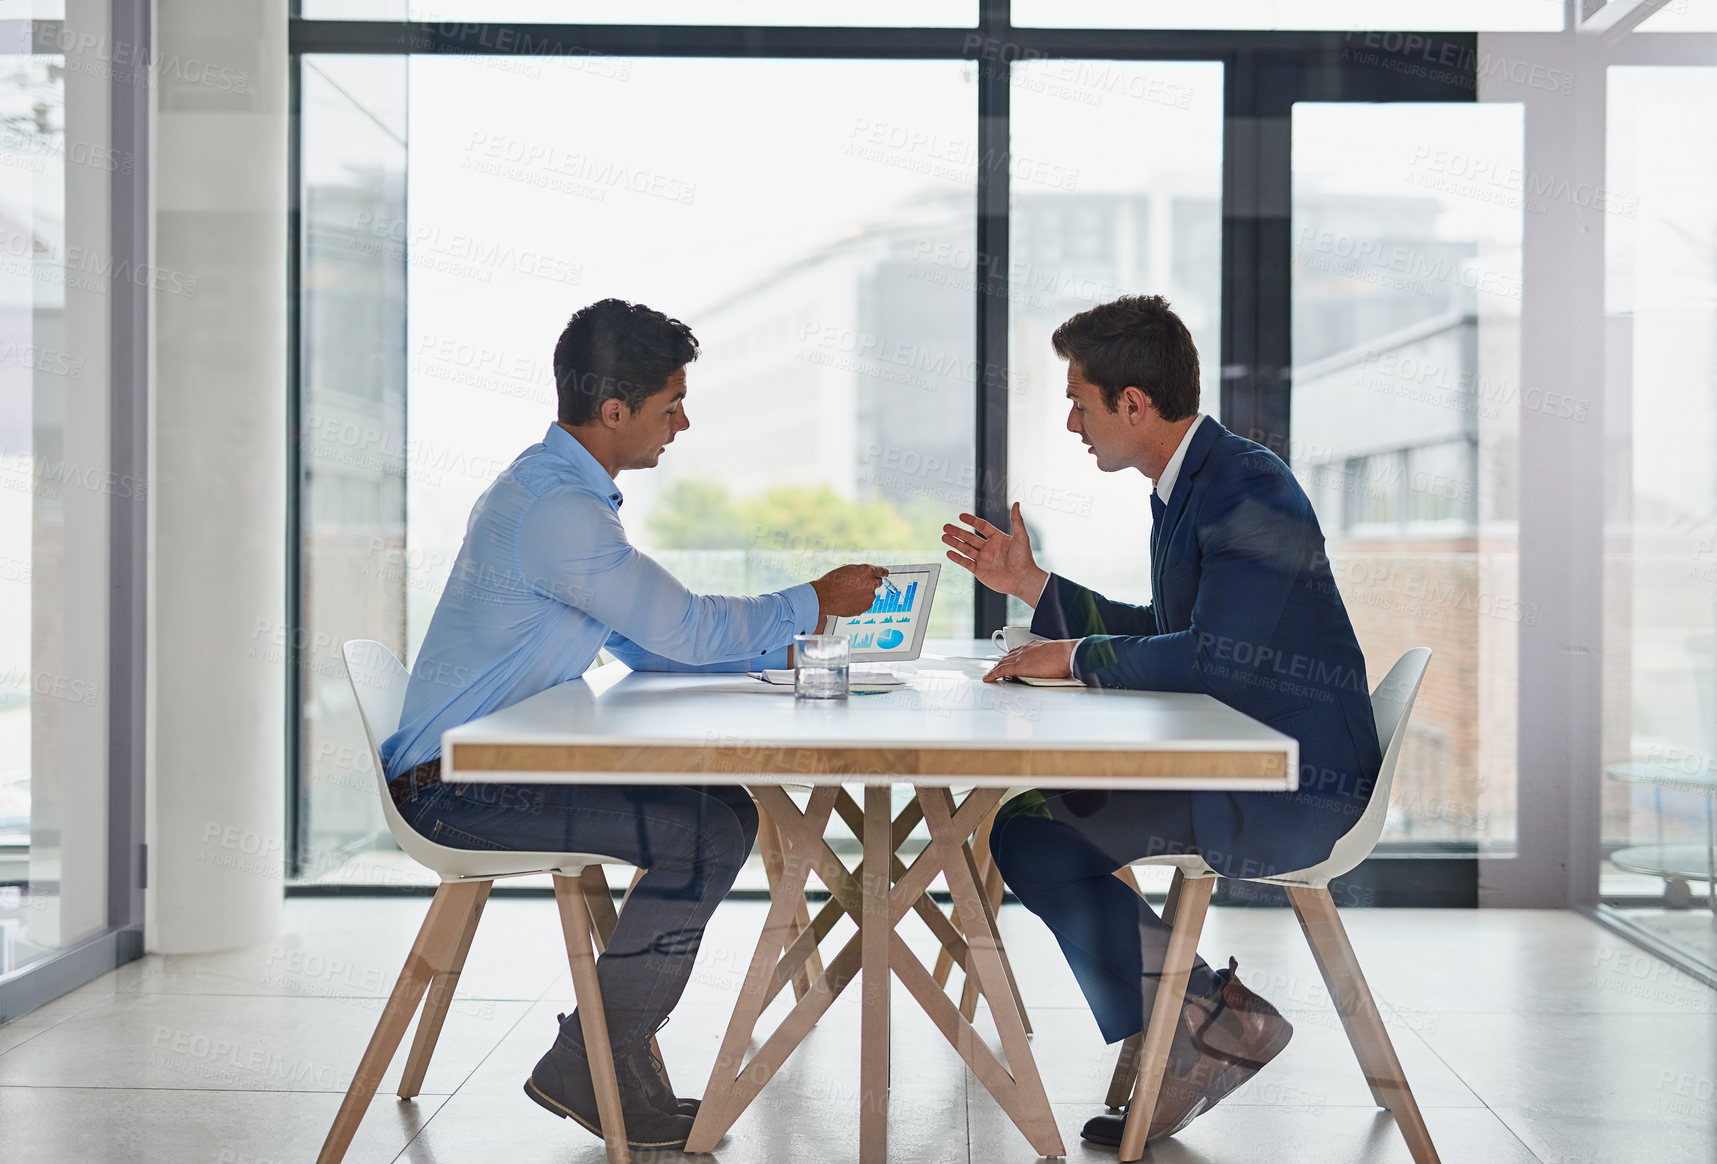 Buy stock photo Shot of two businessmen using a digital tablet during a meeting in an office